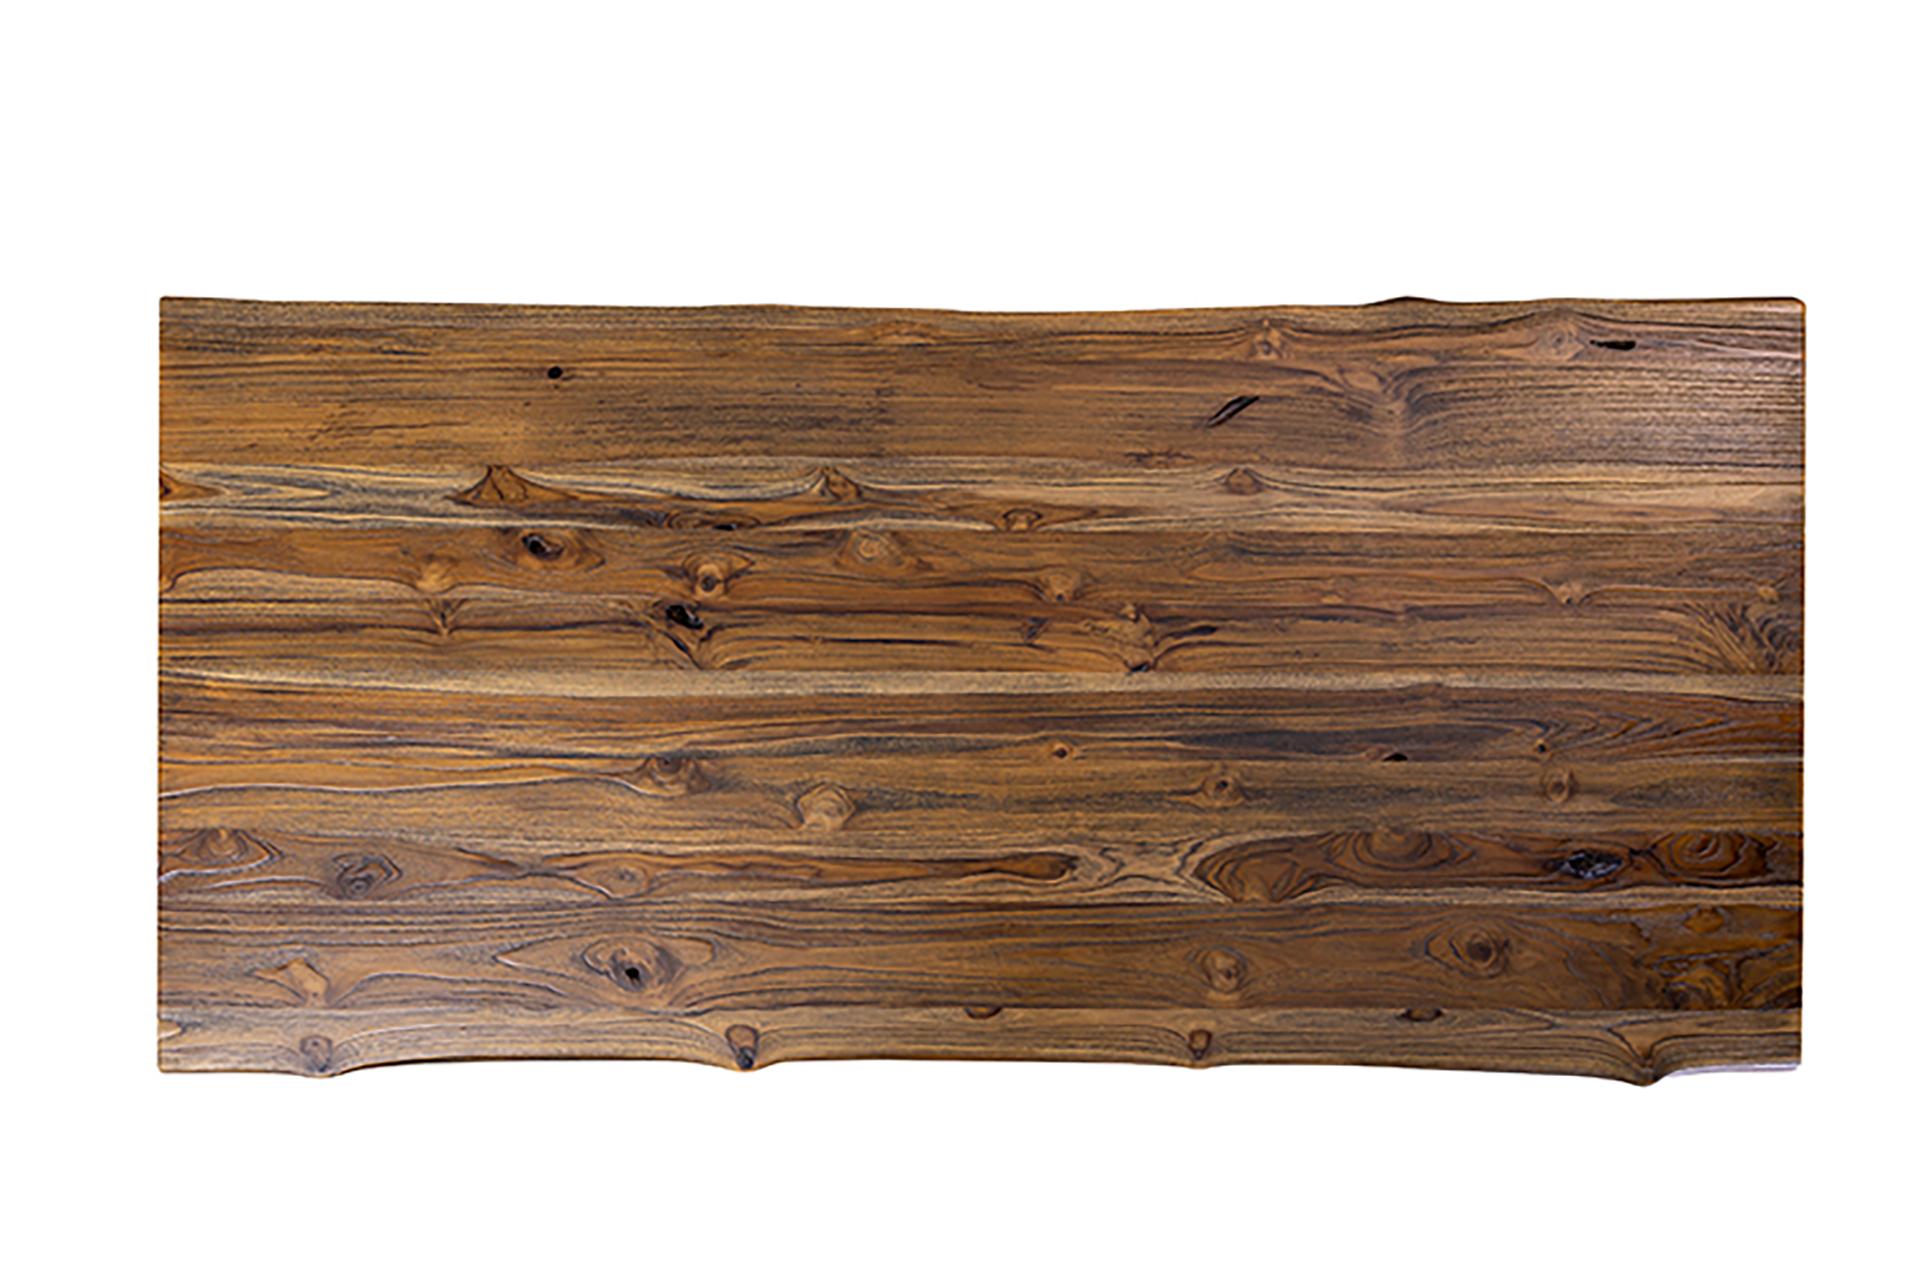 Hand-Crafted Solid Teak Organic Distressed Rectangular Live Edge Table with Metal Legs For Sale